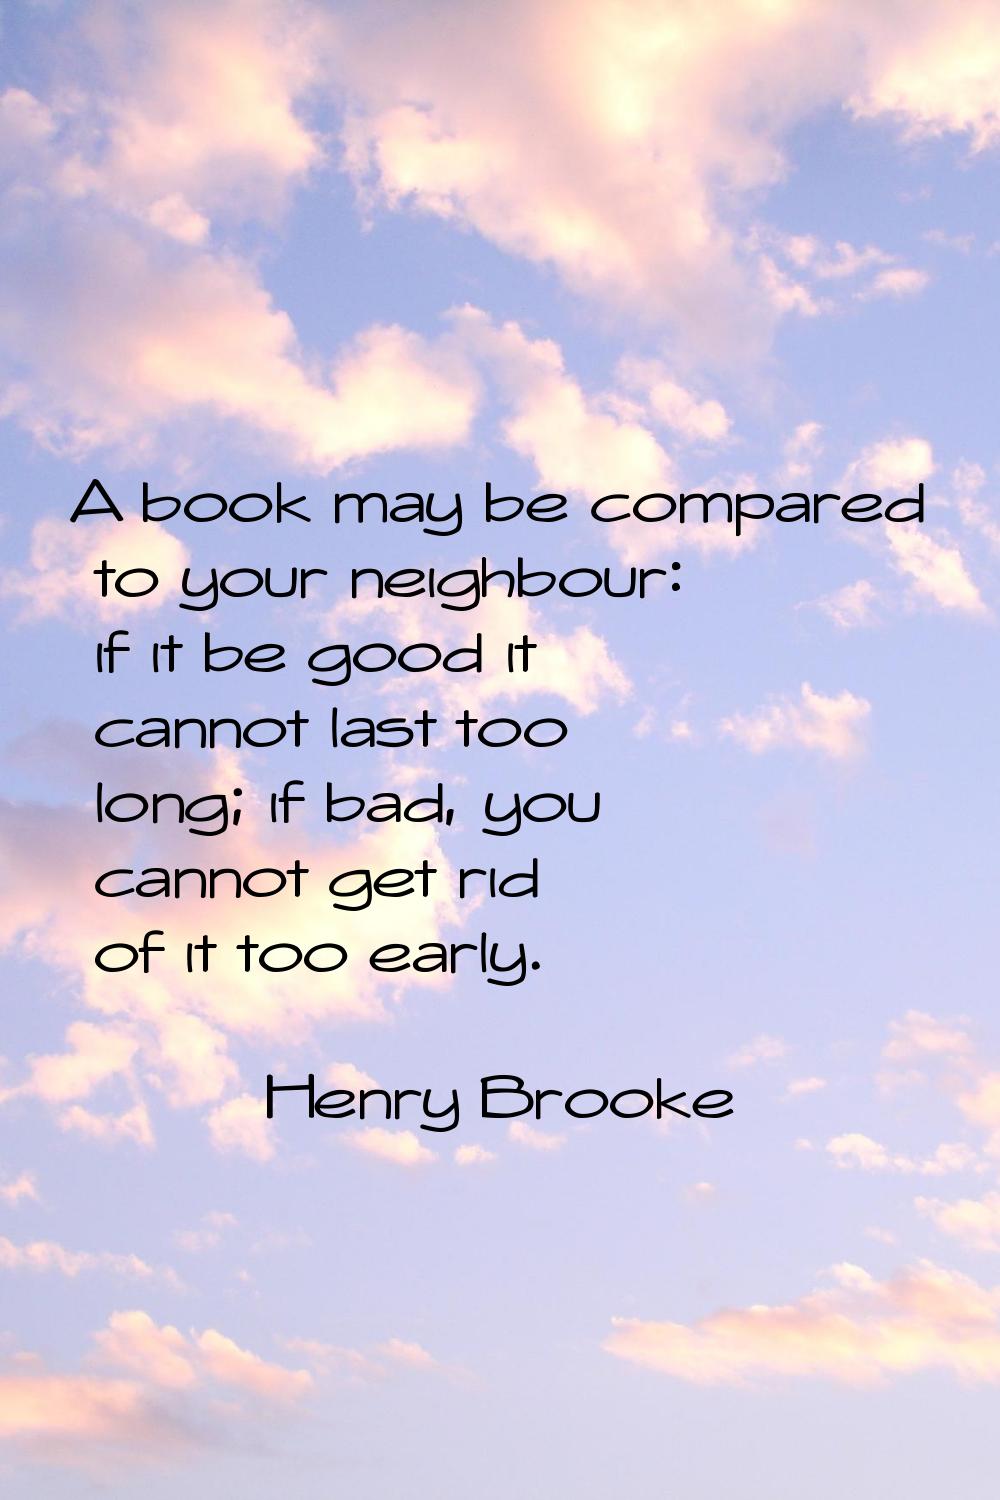 A book may be compared to your neighbour: if it be good it cannot last too long; if bad, you cannot